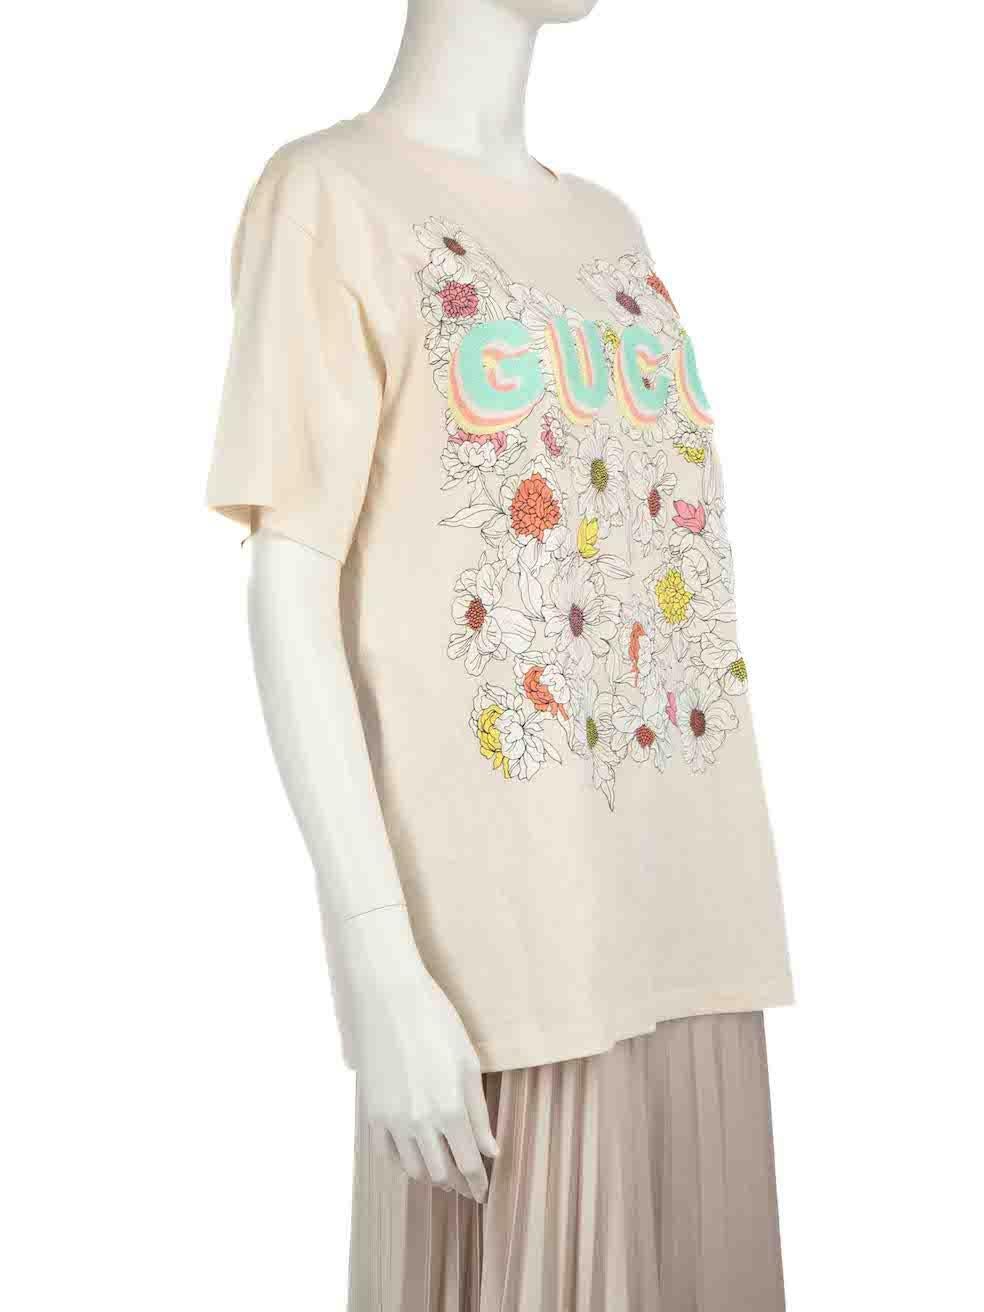 CONDITION is Never worn, with tags. No visible wear to top is evident on this new Gucci designer resale item.
 
 
 
 Details
 
 
 Peach
 
 Cotton
 
 T-shirt
 
 Floral pattern
 
 Logo embroidered detail
 
 Round neck
 
 Oversized fit
 
 
 
 
 
 Made